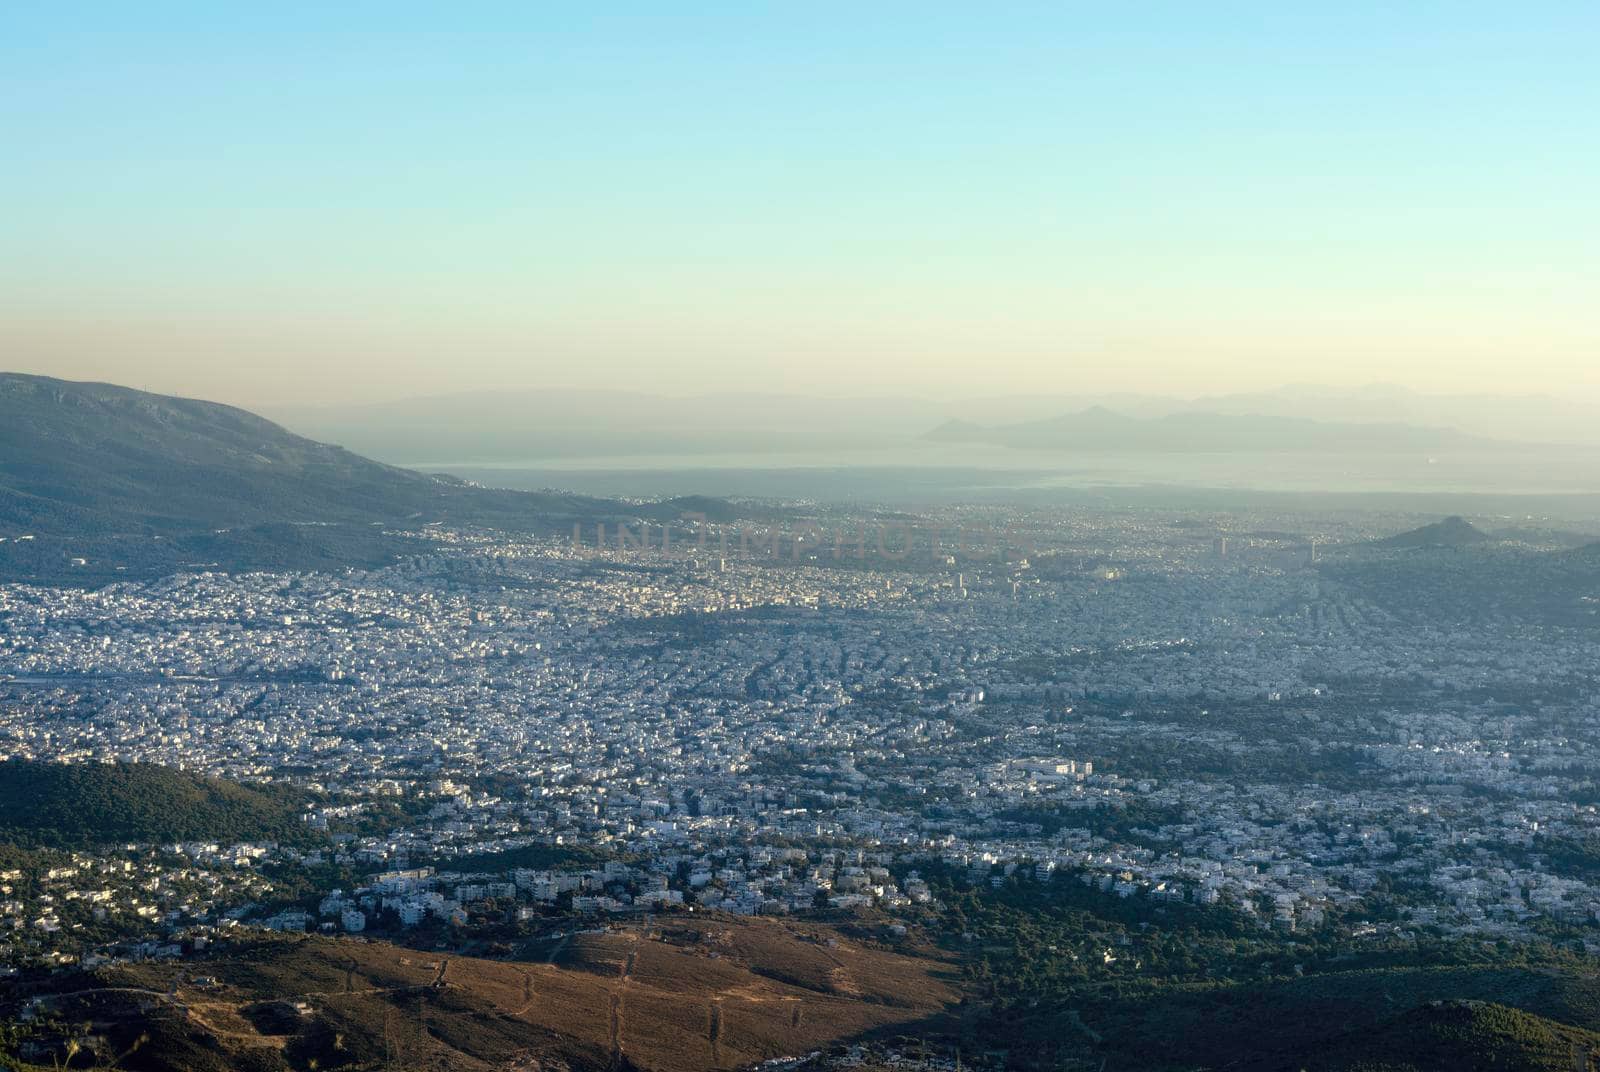 Panoramic view over Athens, taken shot from Penteli mountain by ankarb